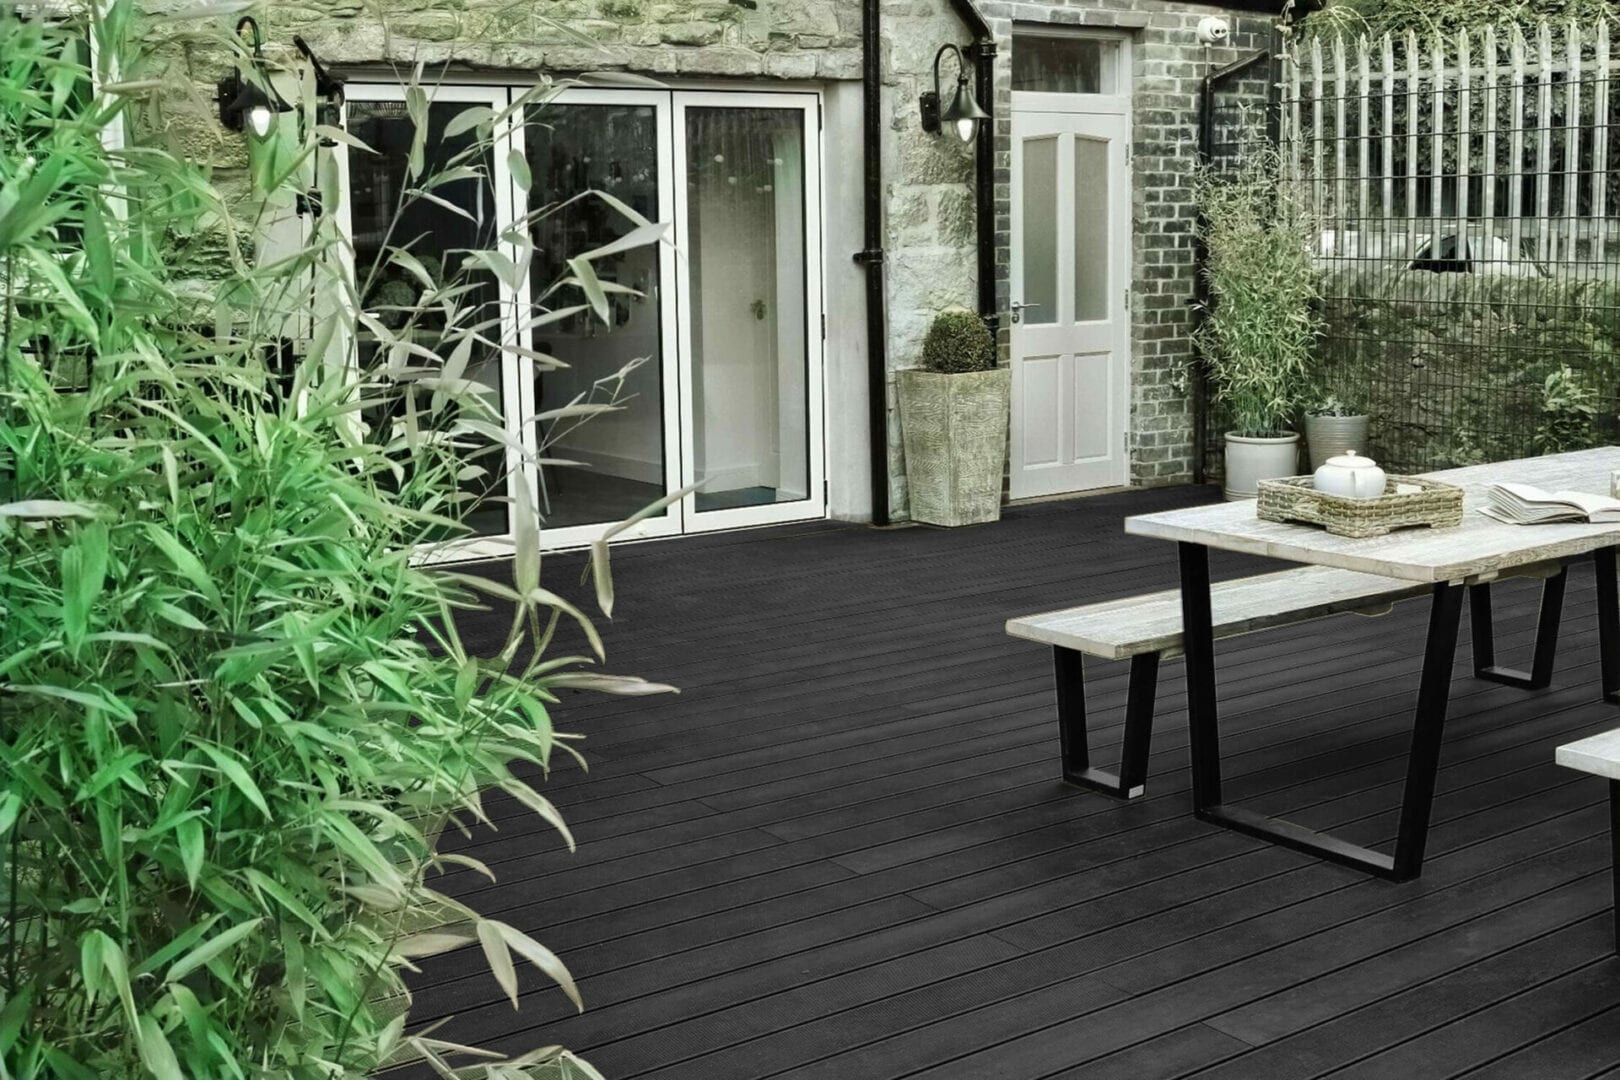 How to remove stains, scratches and marks from composite decking